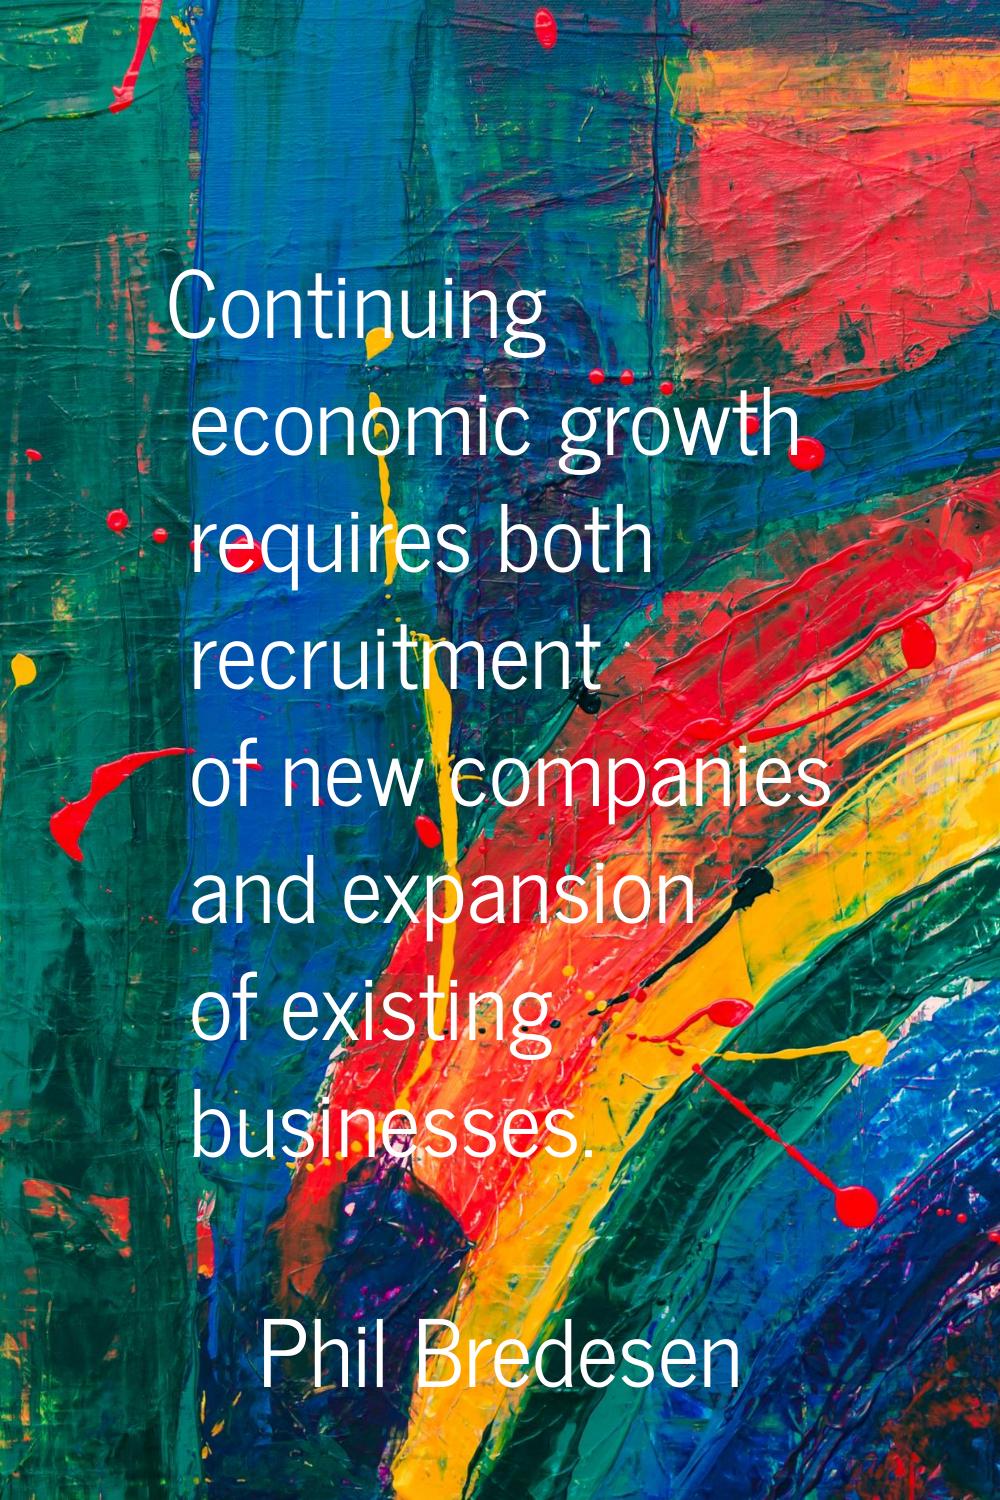 Continuing economic growth requires both recruitment of new companies and expansion of existing bus